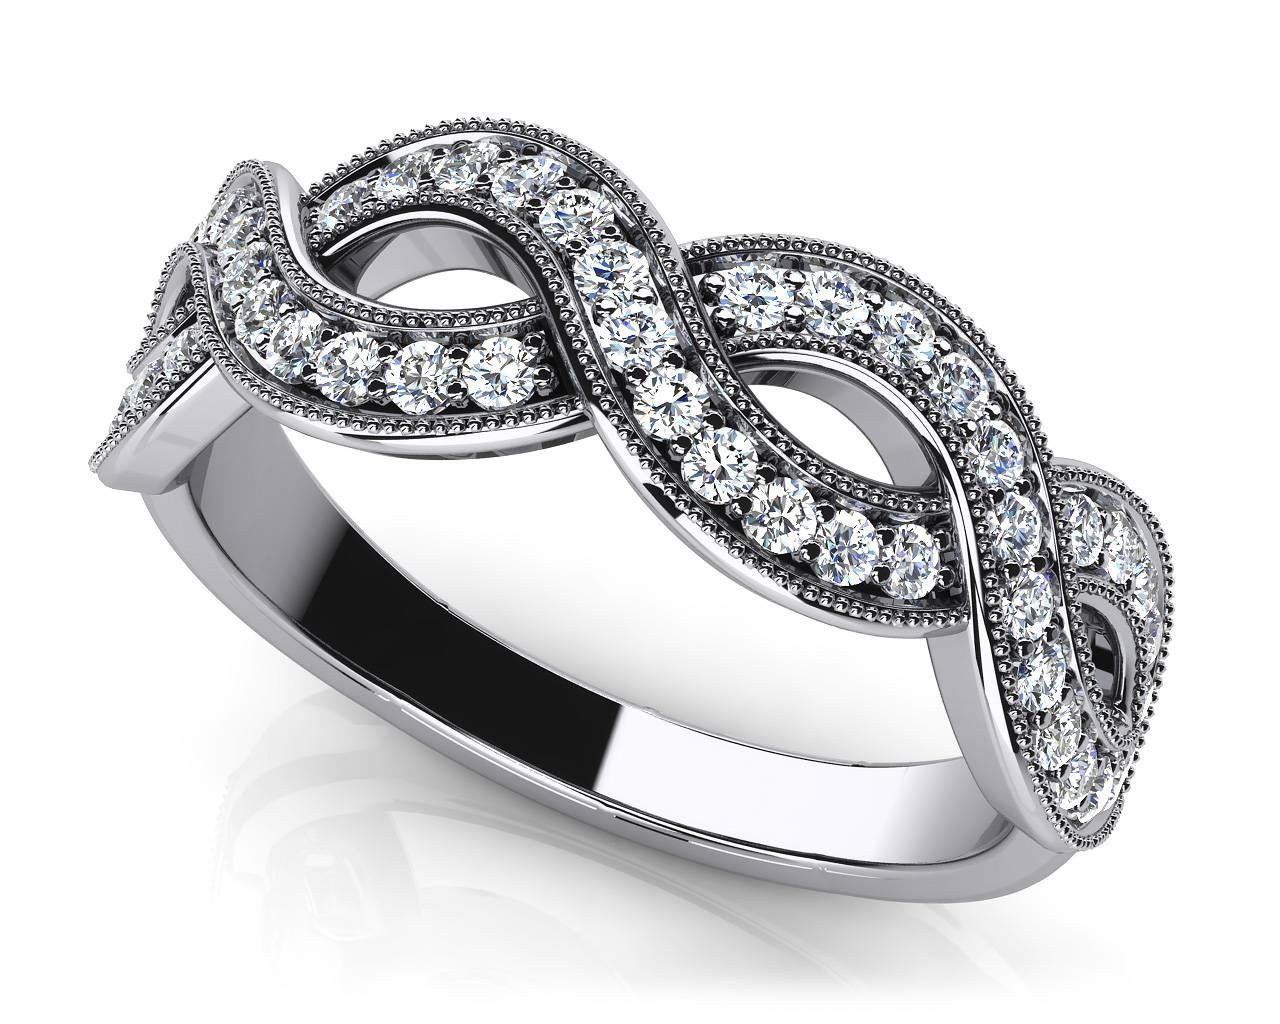 Design Your Own Diamond Anniversary Ring & Eternity Ring Throughout Most Current Vintage Anniversary Rings (View 9 of 25)